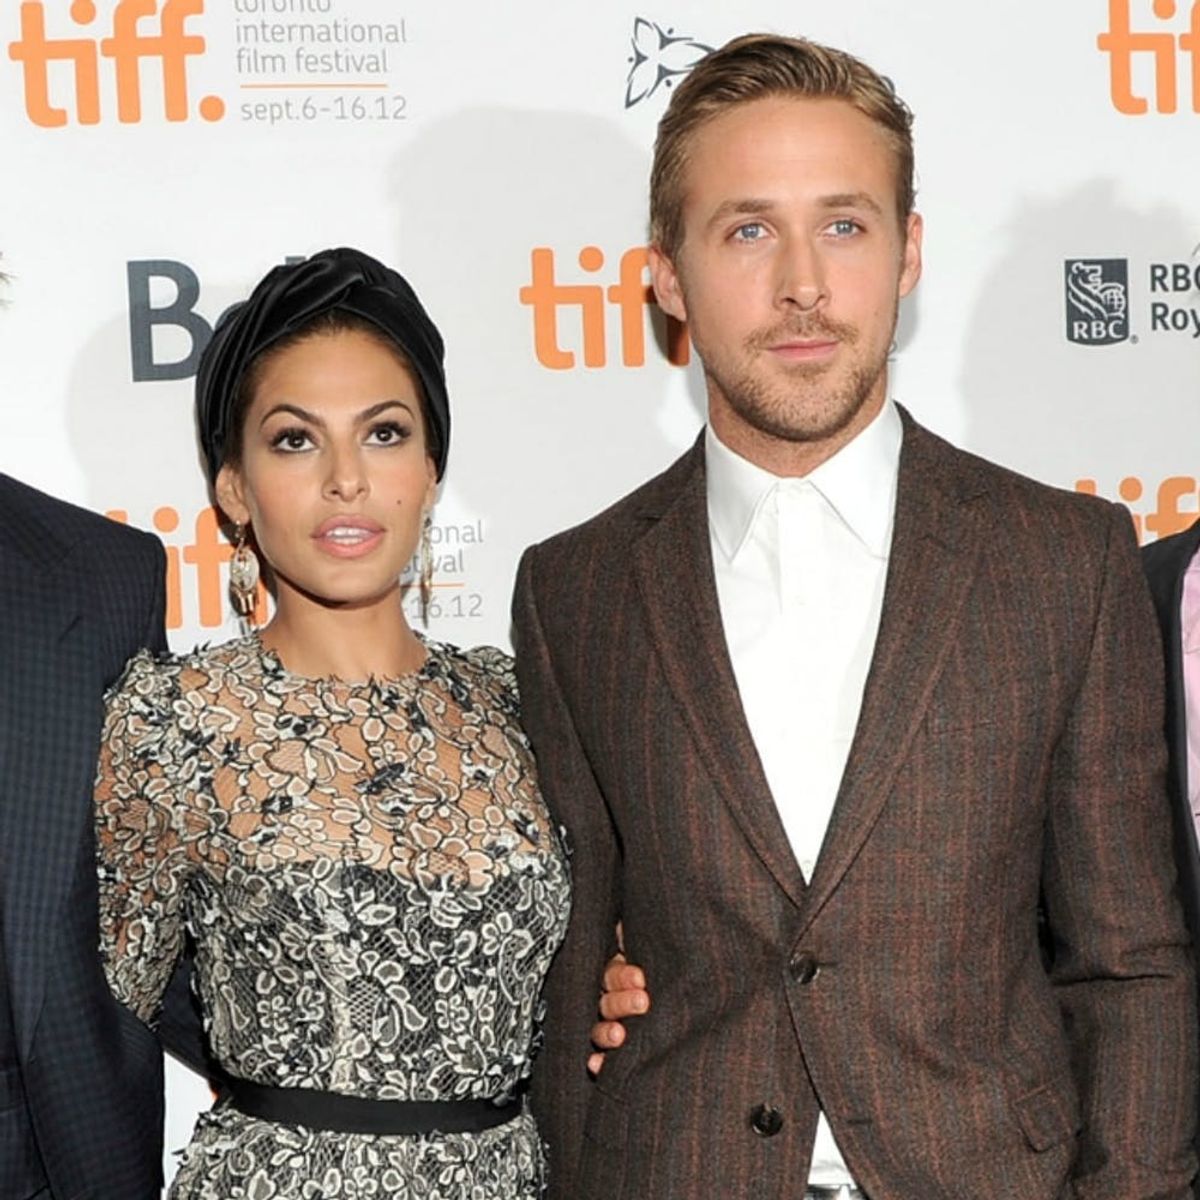 In 7 Words, Ryan Gosling Summarized His Love for Eva Mendes Better Than Our Wildest Dreams